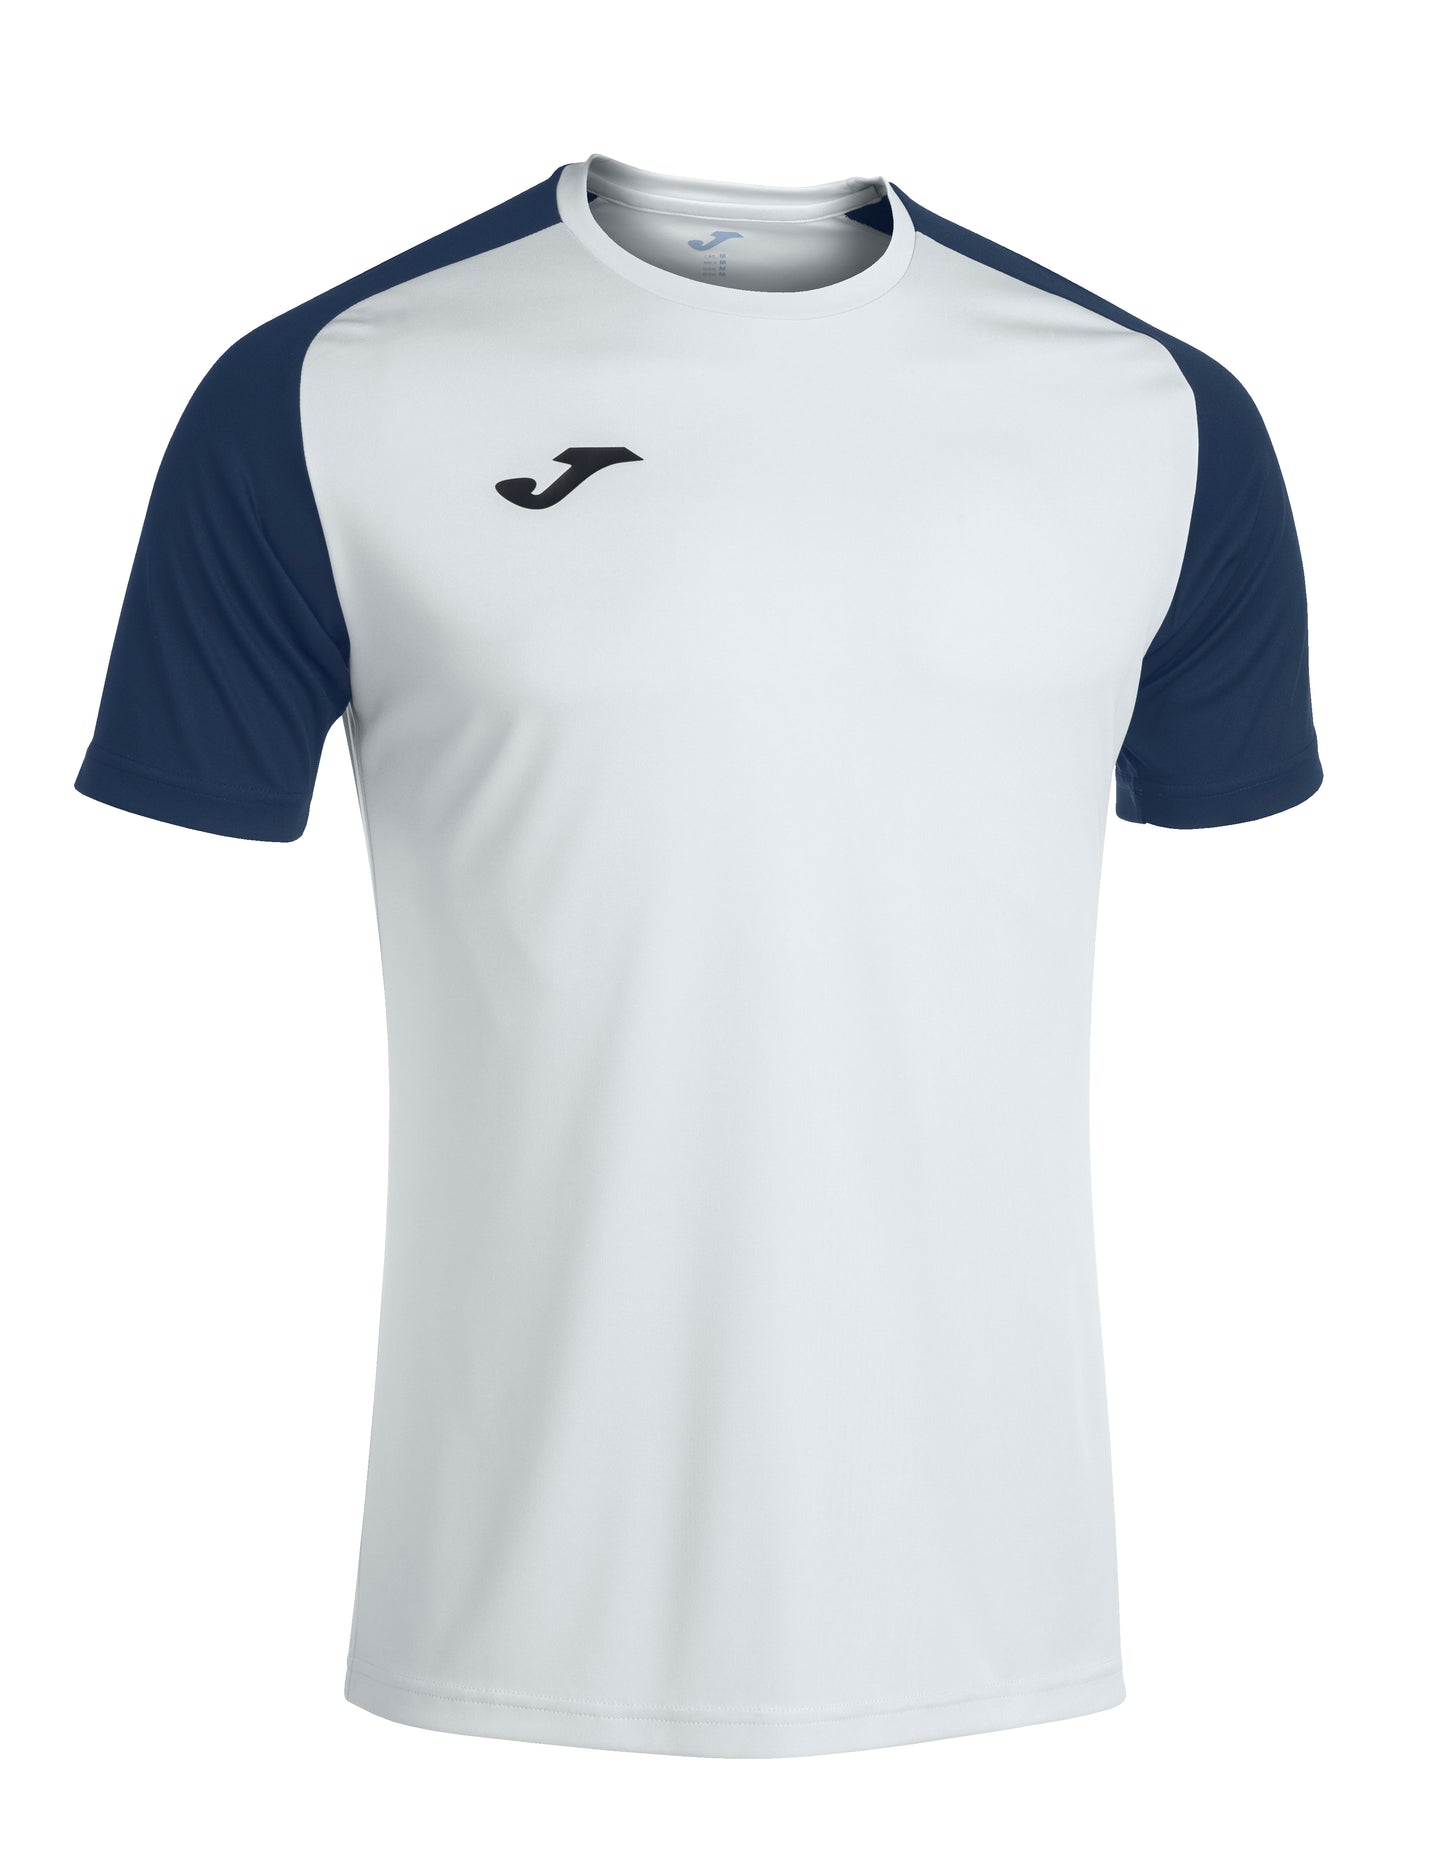 Academy IV - Youth Jersey